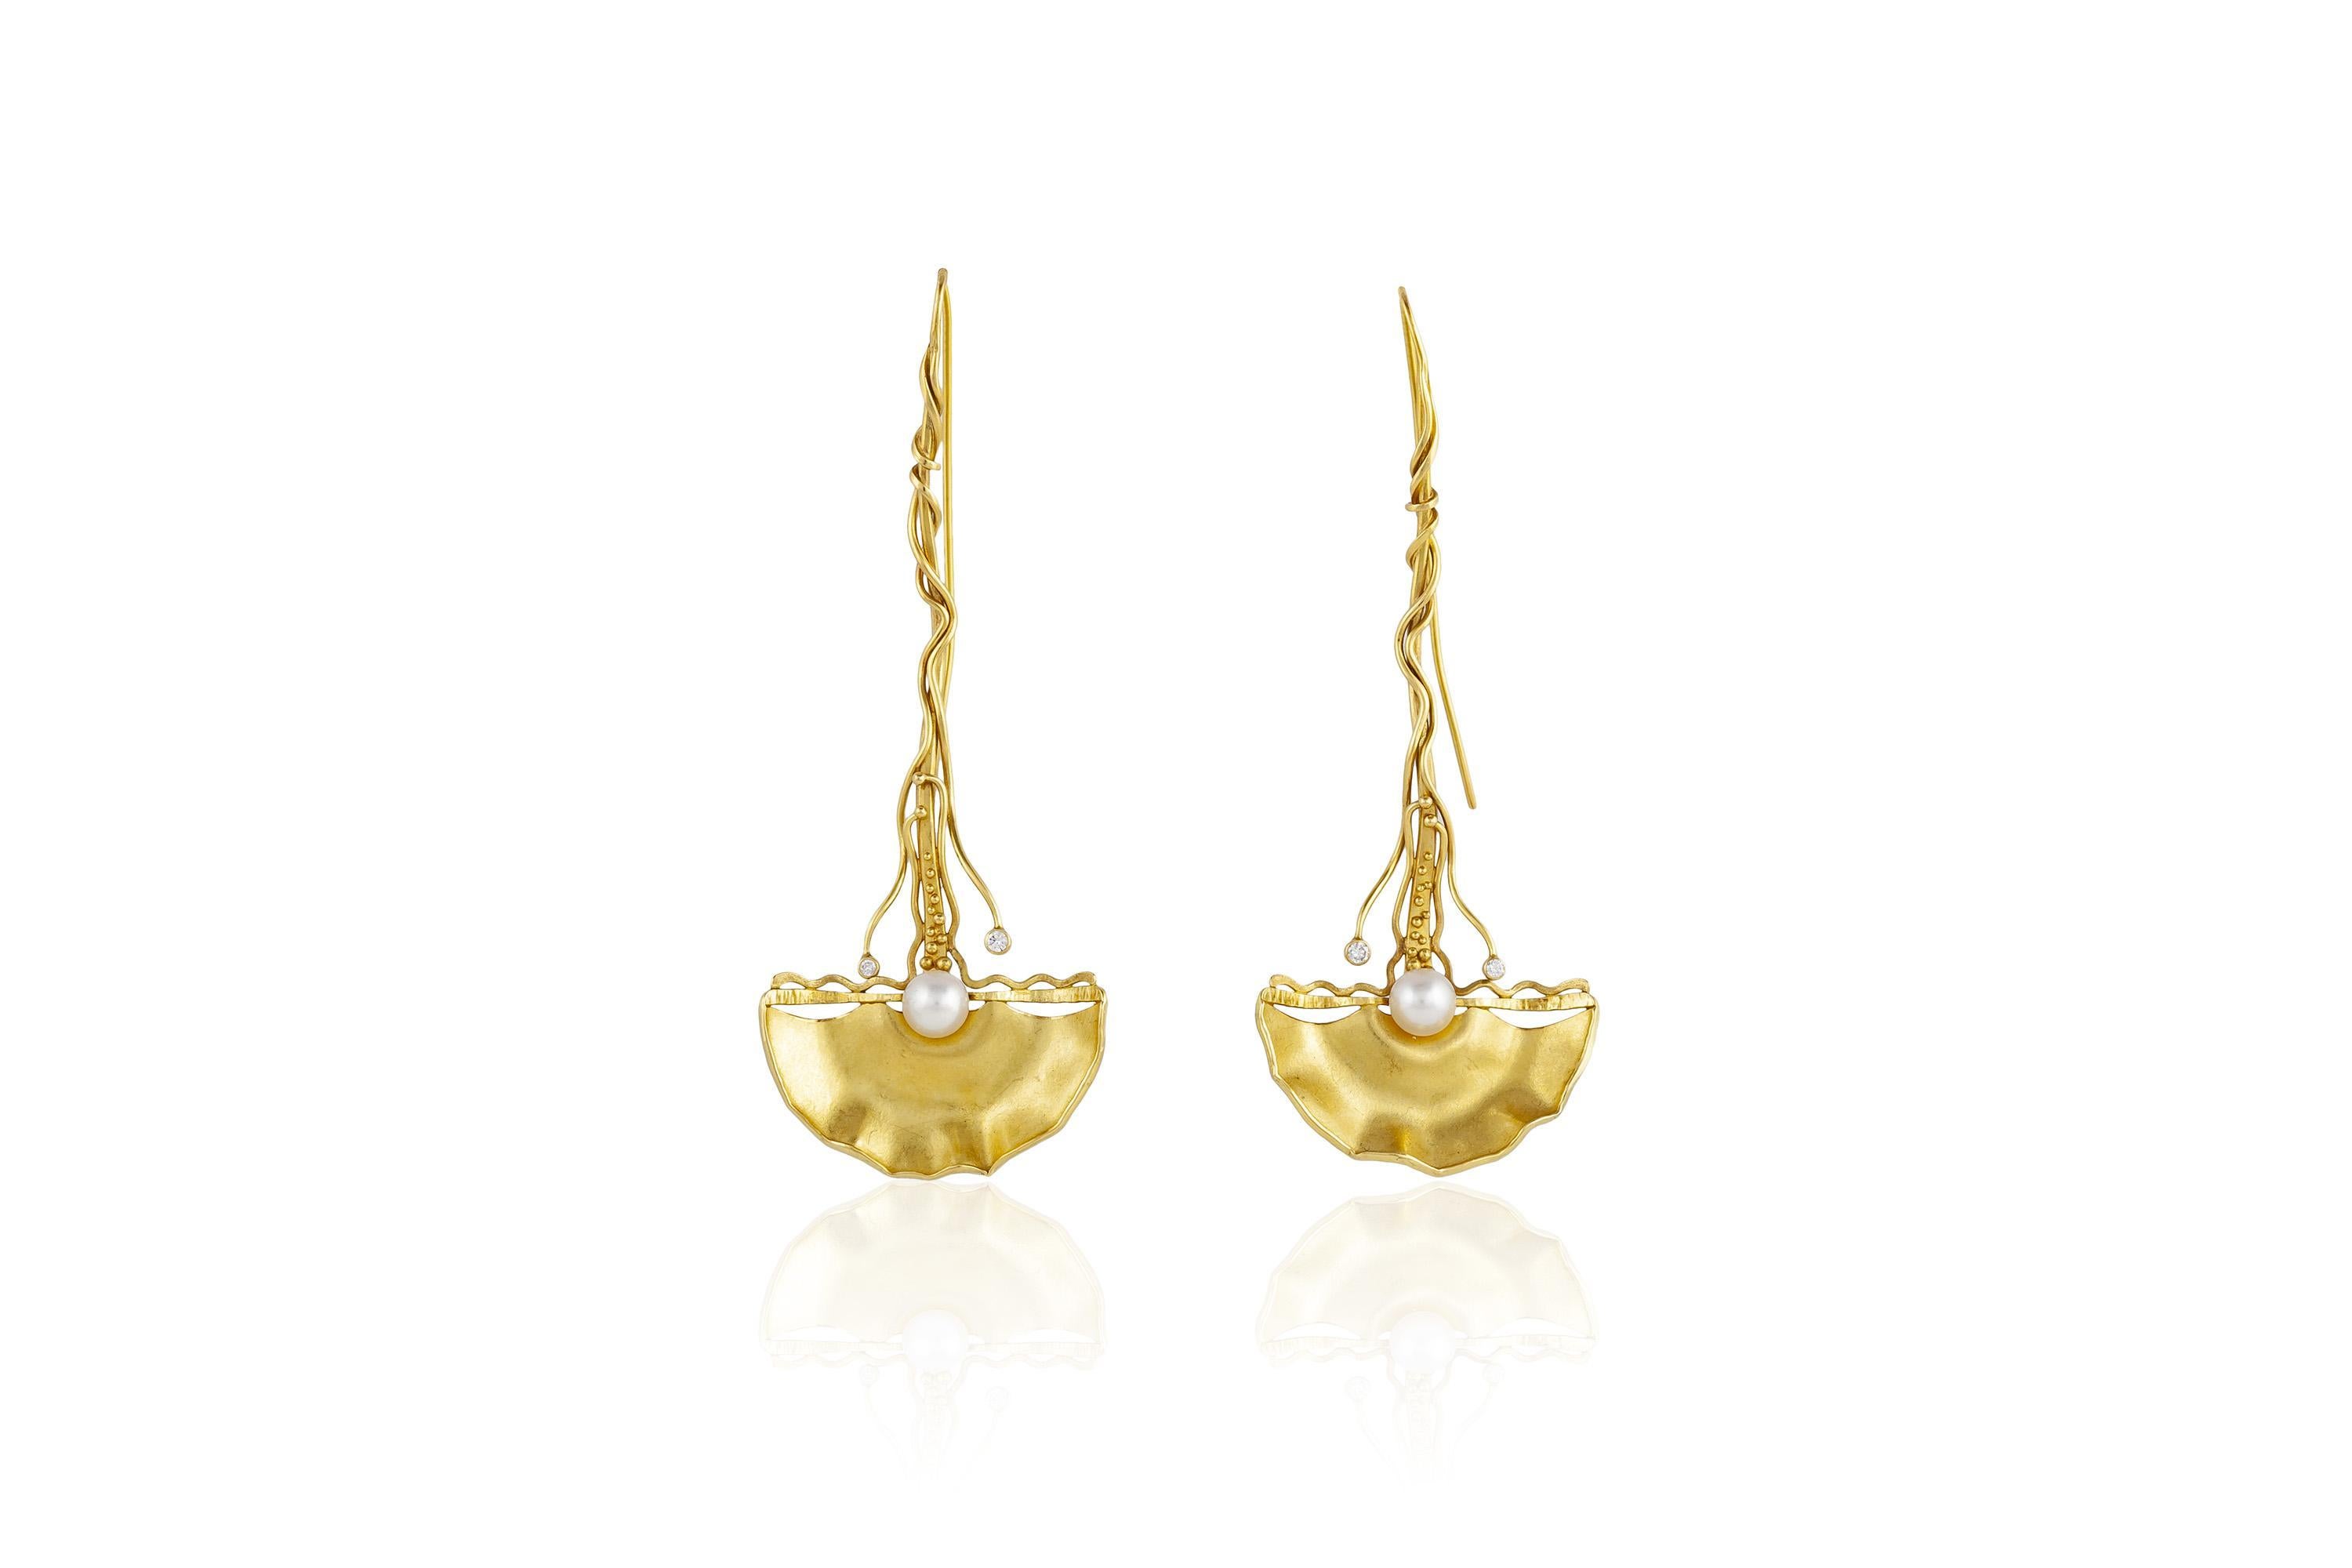 Vintage 1990s Gold Ginkgo Dangle Earrings with Pearls and Diamonds In Good Condition For Sale In New York, NY